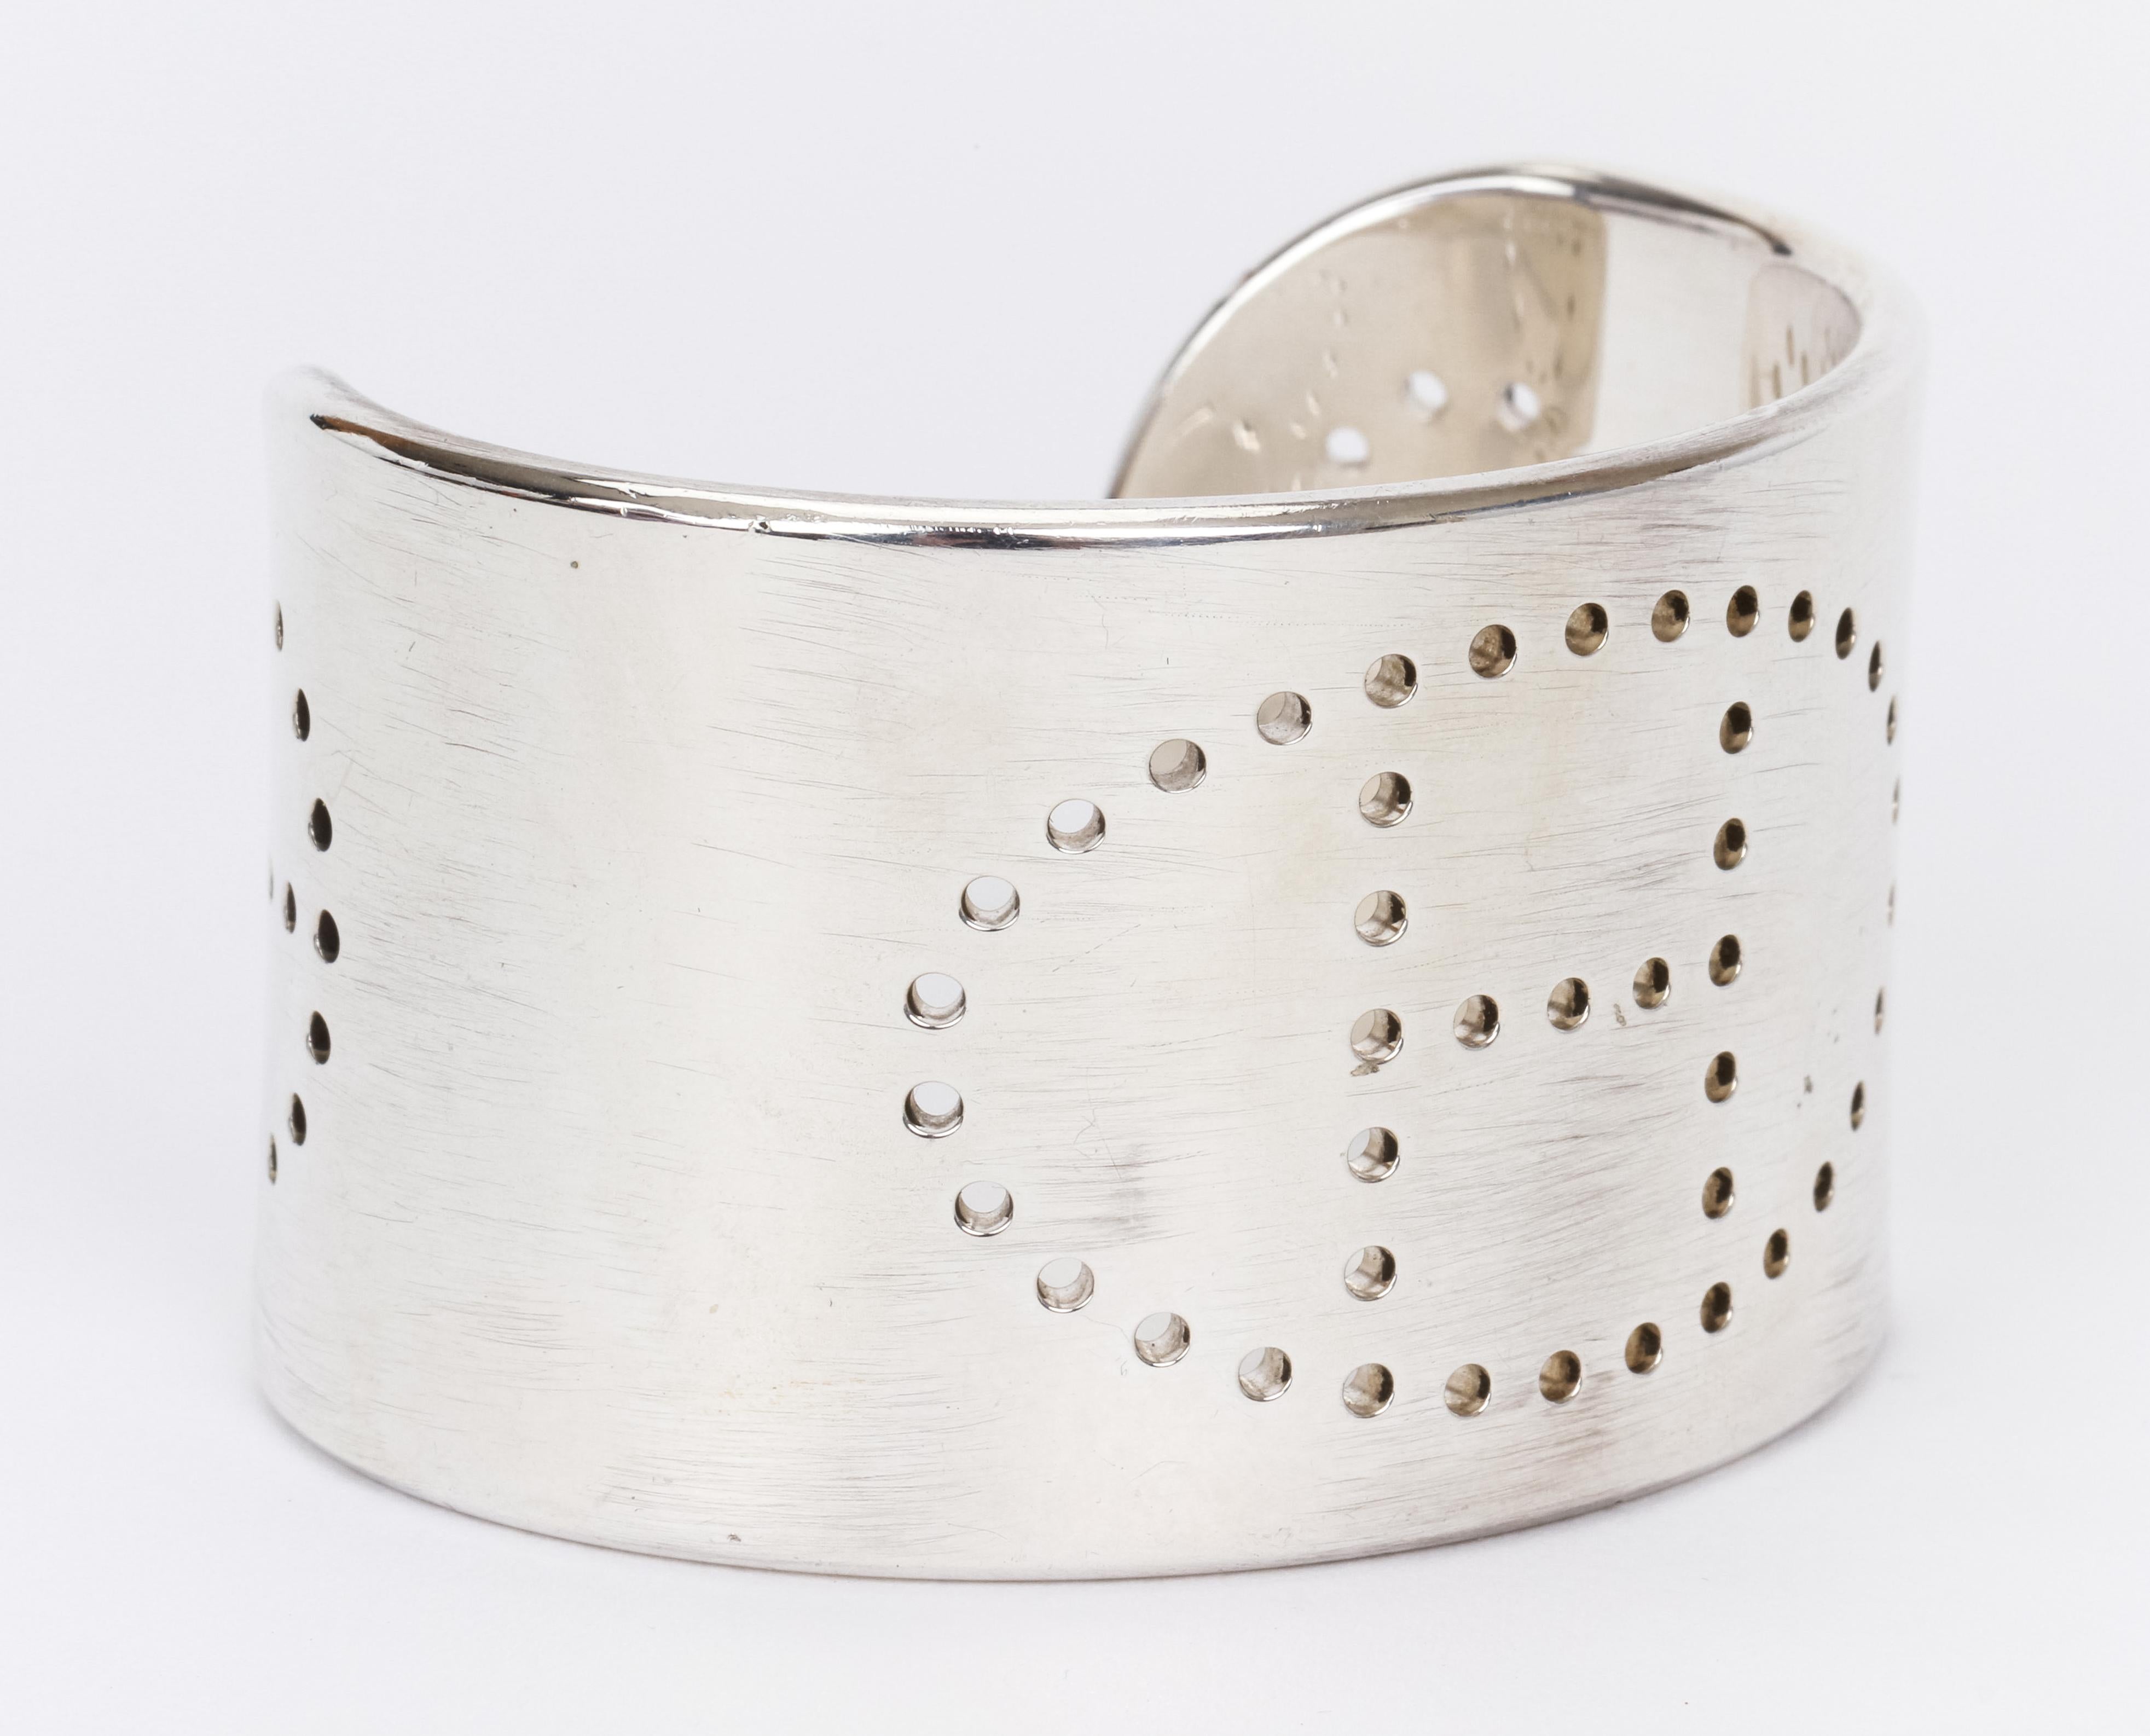 Hermes Sterling Silver 925 H bracelet with perforated logo and motifs on both ends. Generous amount of precious metal.